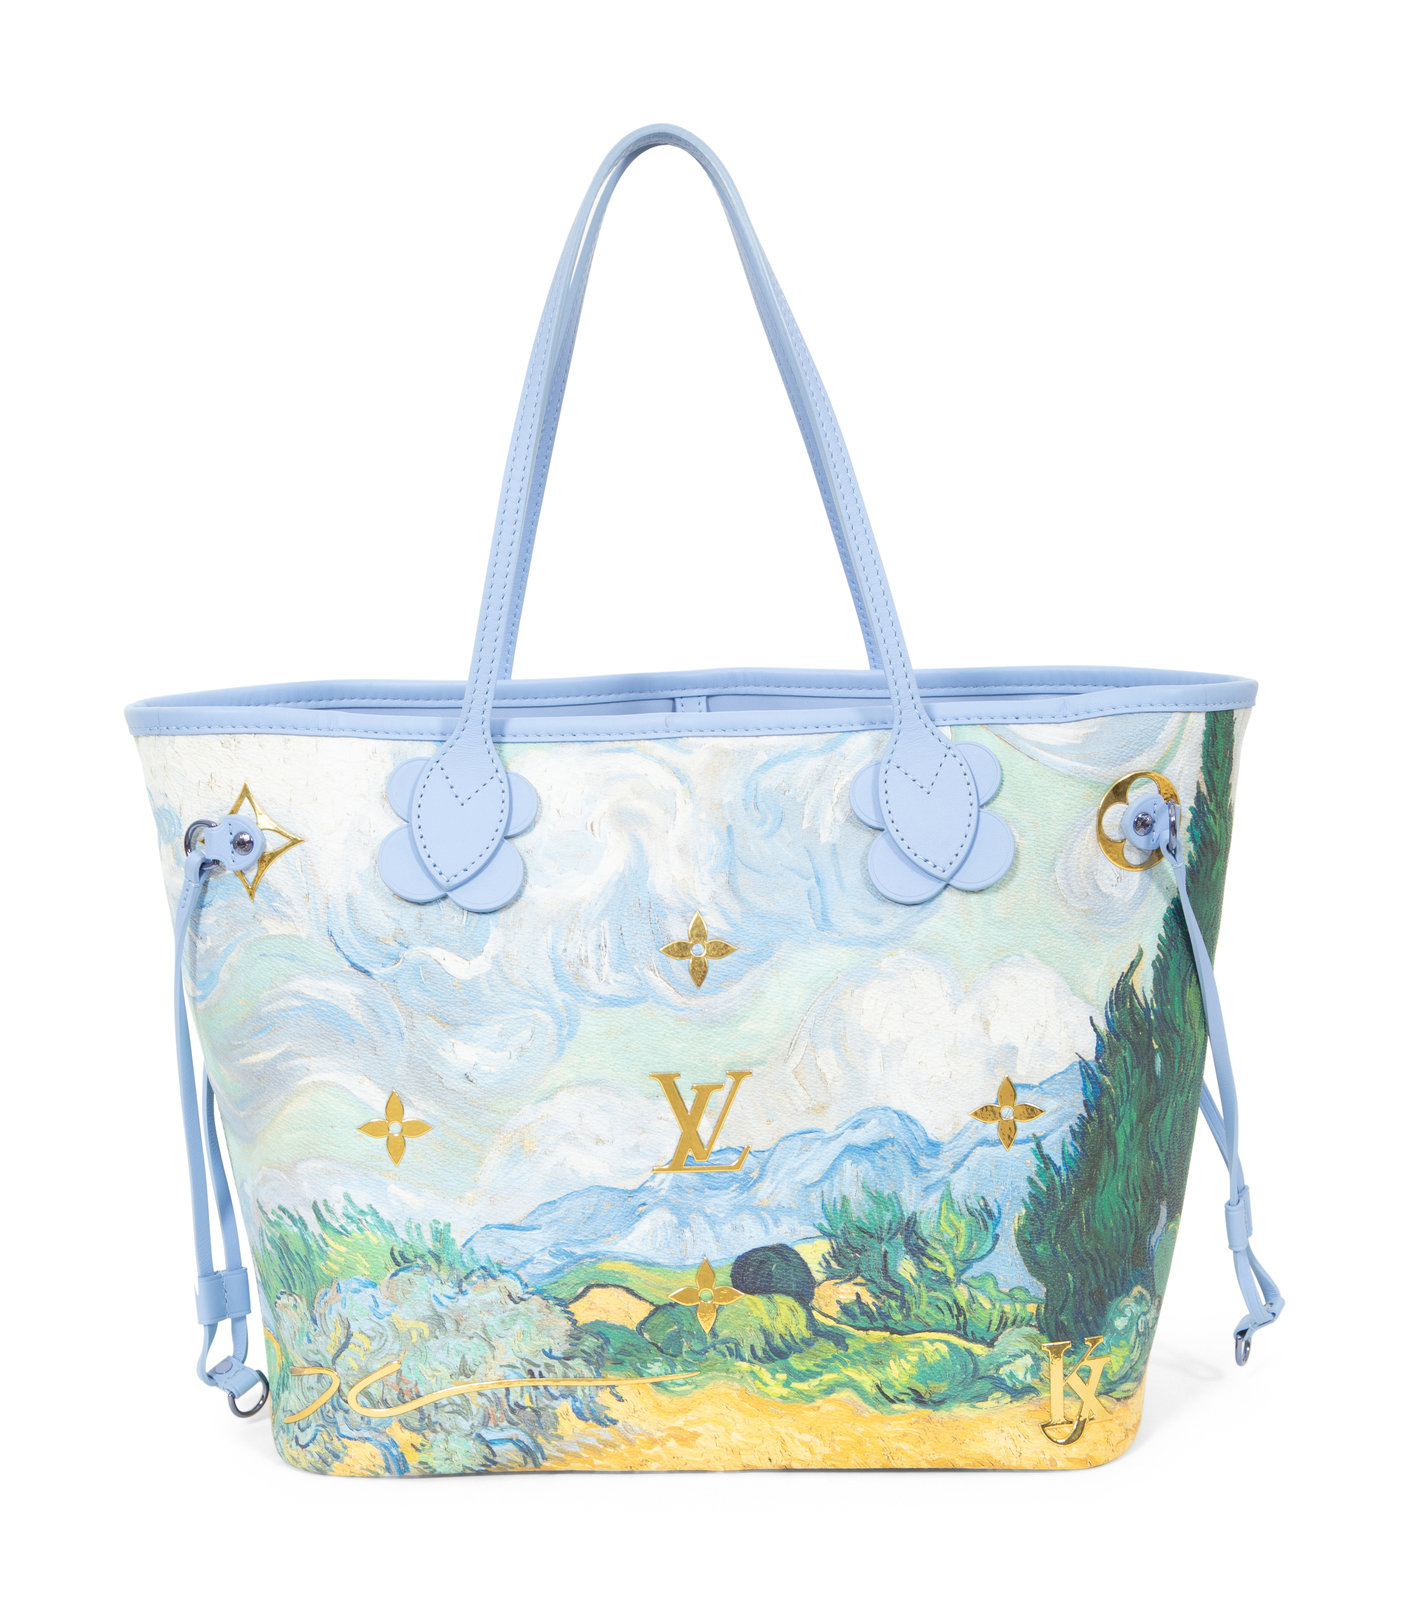 Louis Vuitton x Jeff Koons Van Gogh Neverfull MM Tote with Pochette, 2017